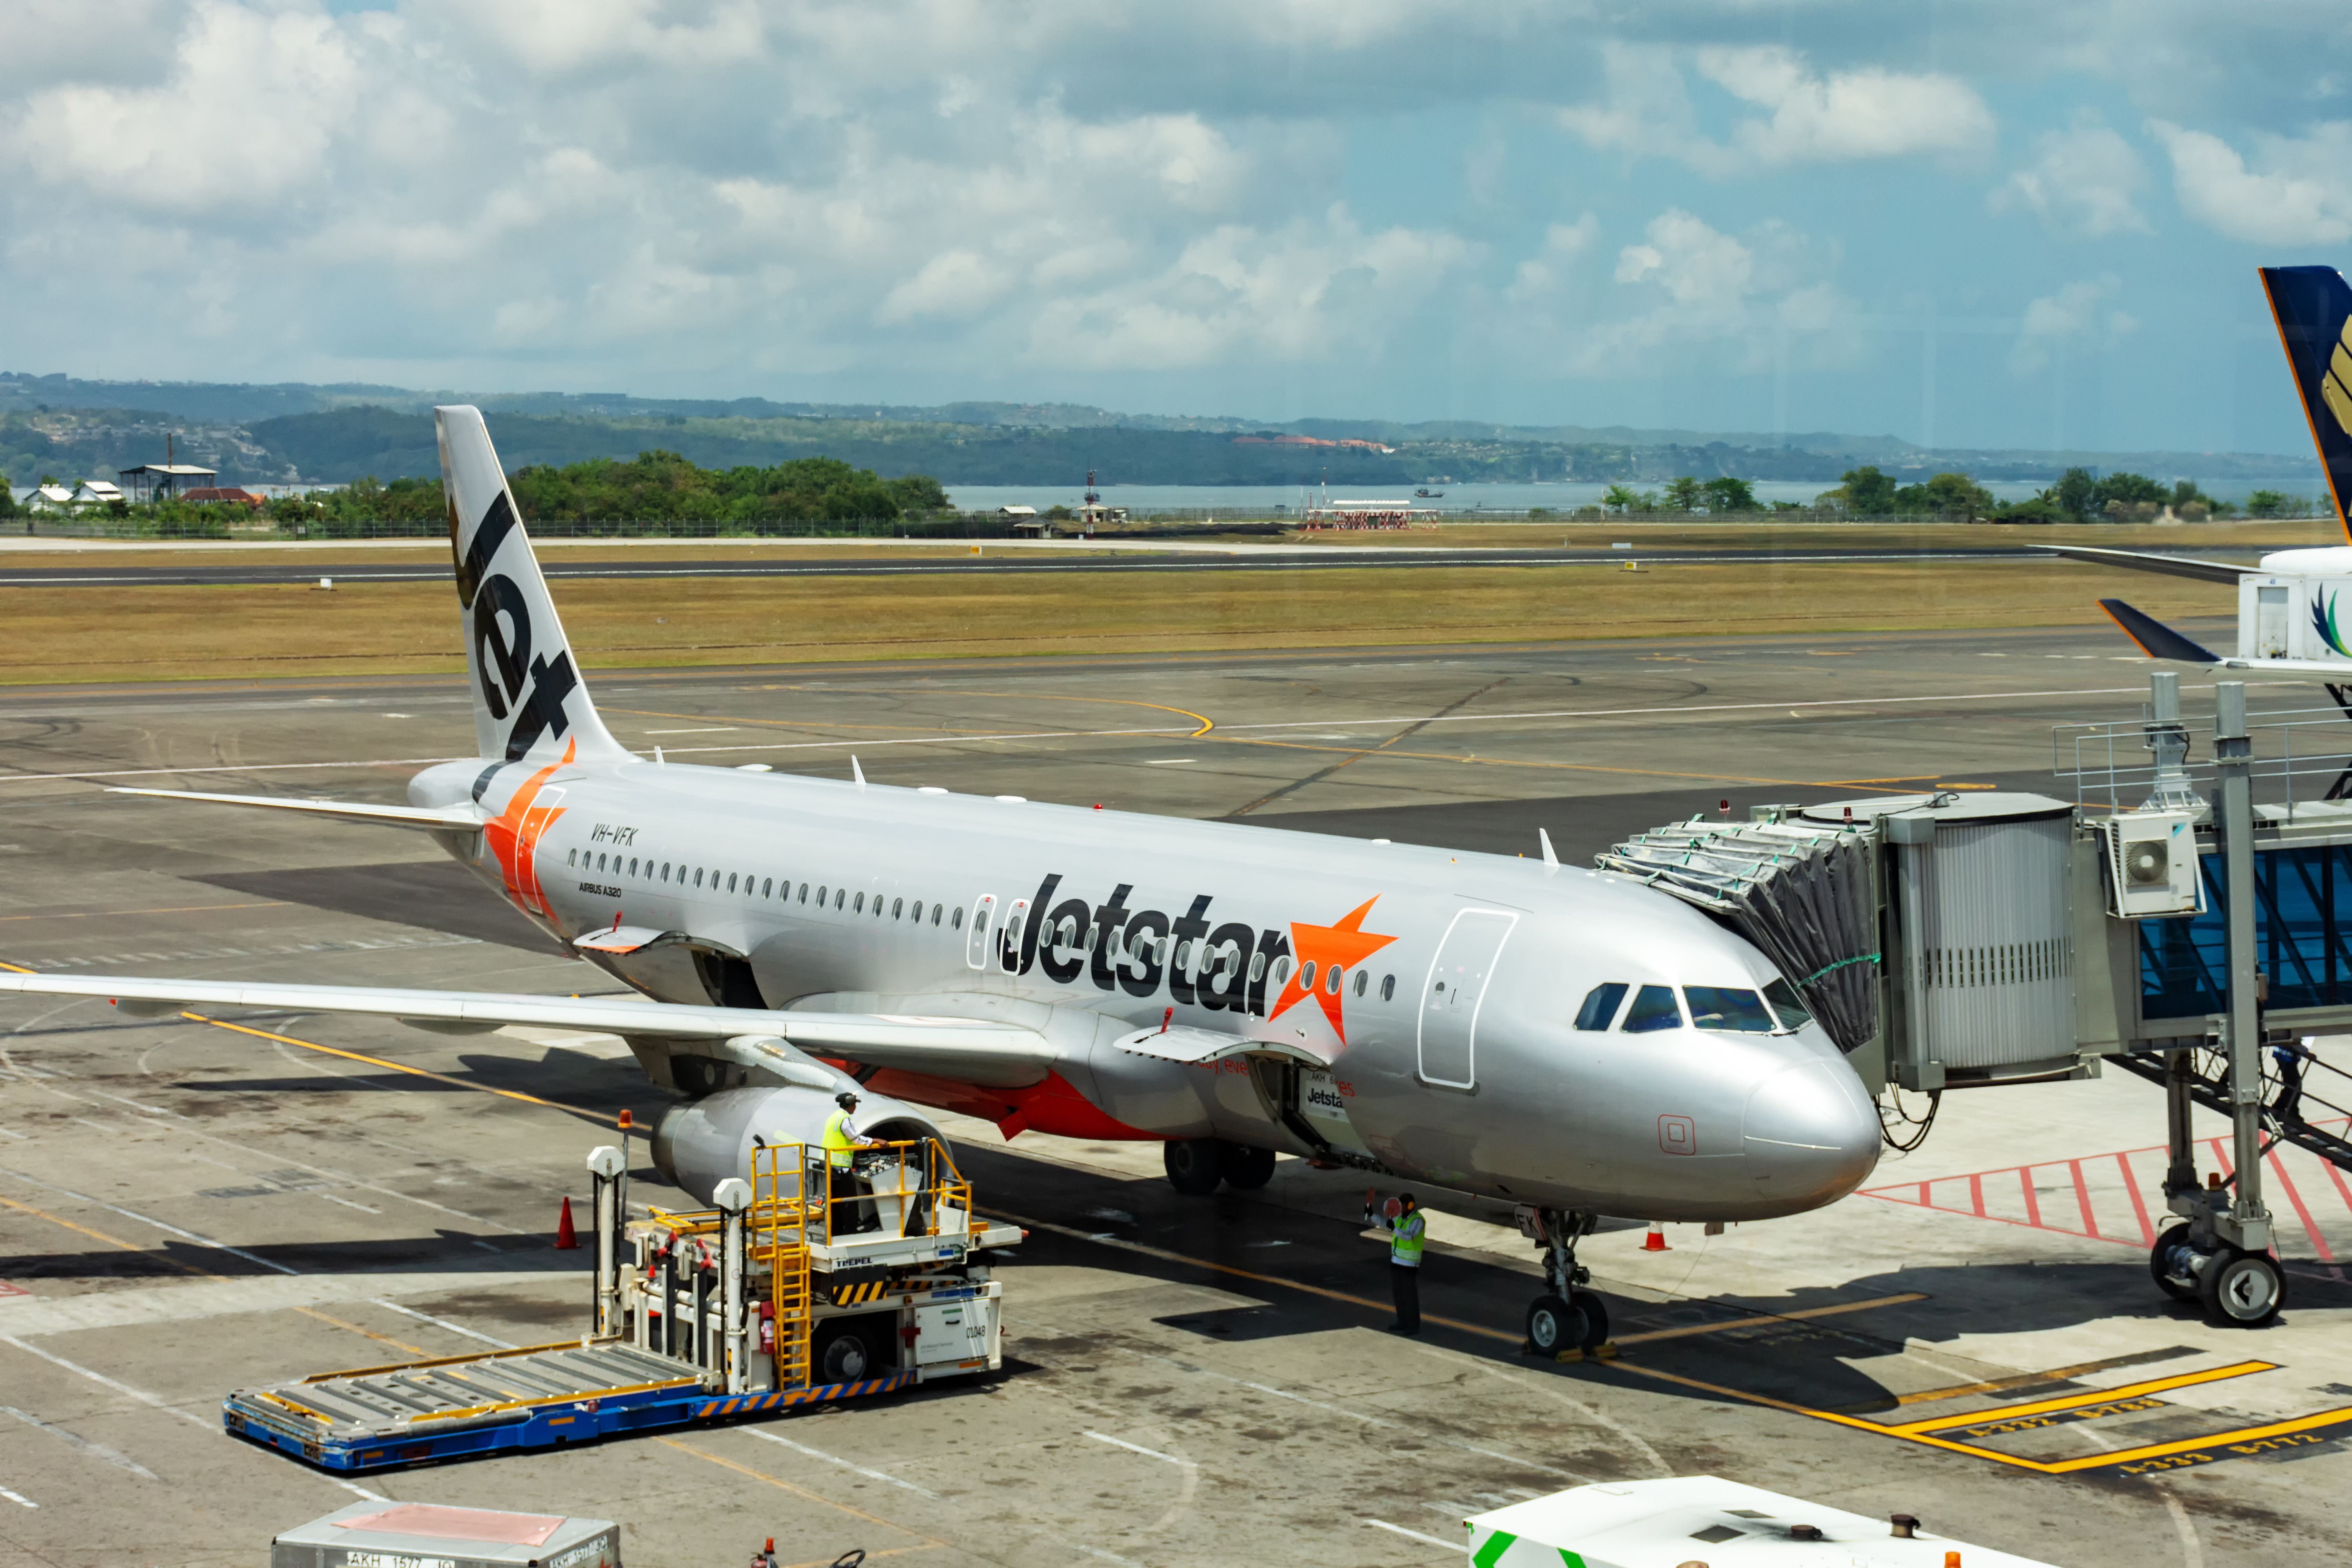 Denpasar, Indonesia - September 19, 2018: Jetstar Airways airplane boarded at tarmac in Bali Ngurah Rai international airport. It is an Australian low-cost airline headquartered in Melbourne.